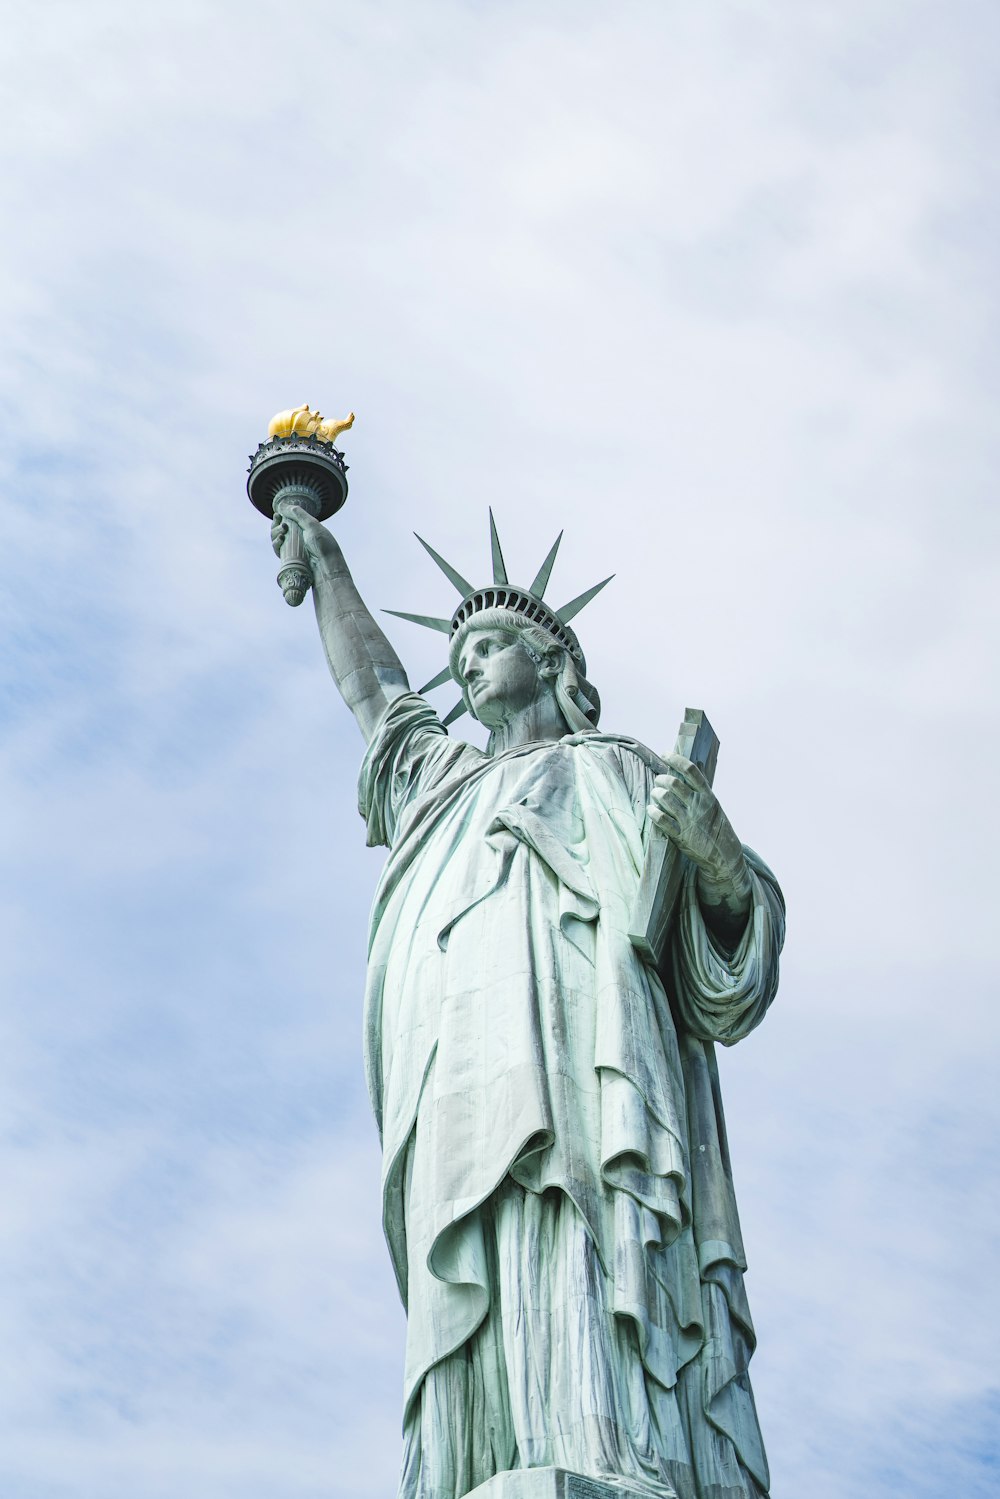 shallow focus photo of Statue of Liberty